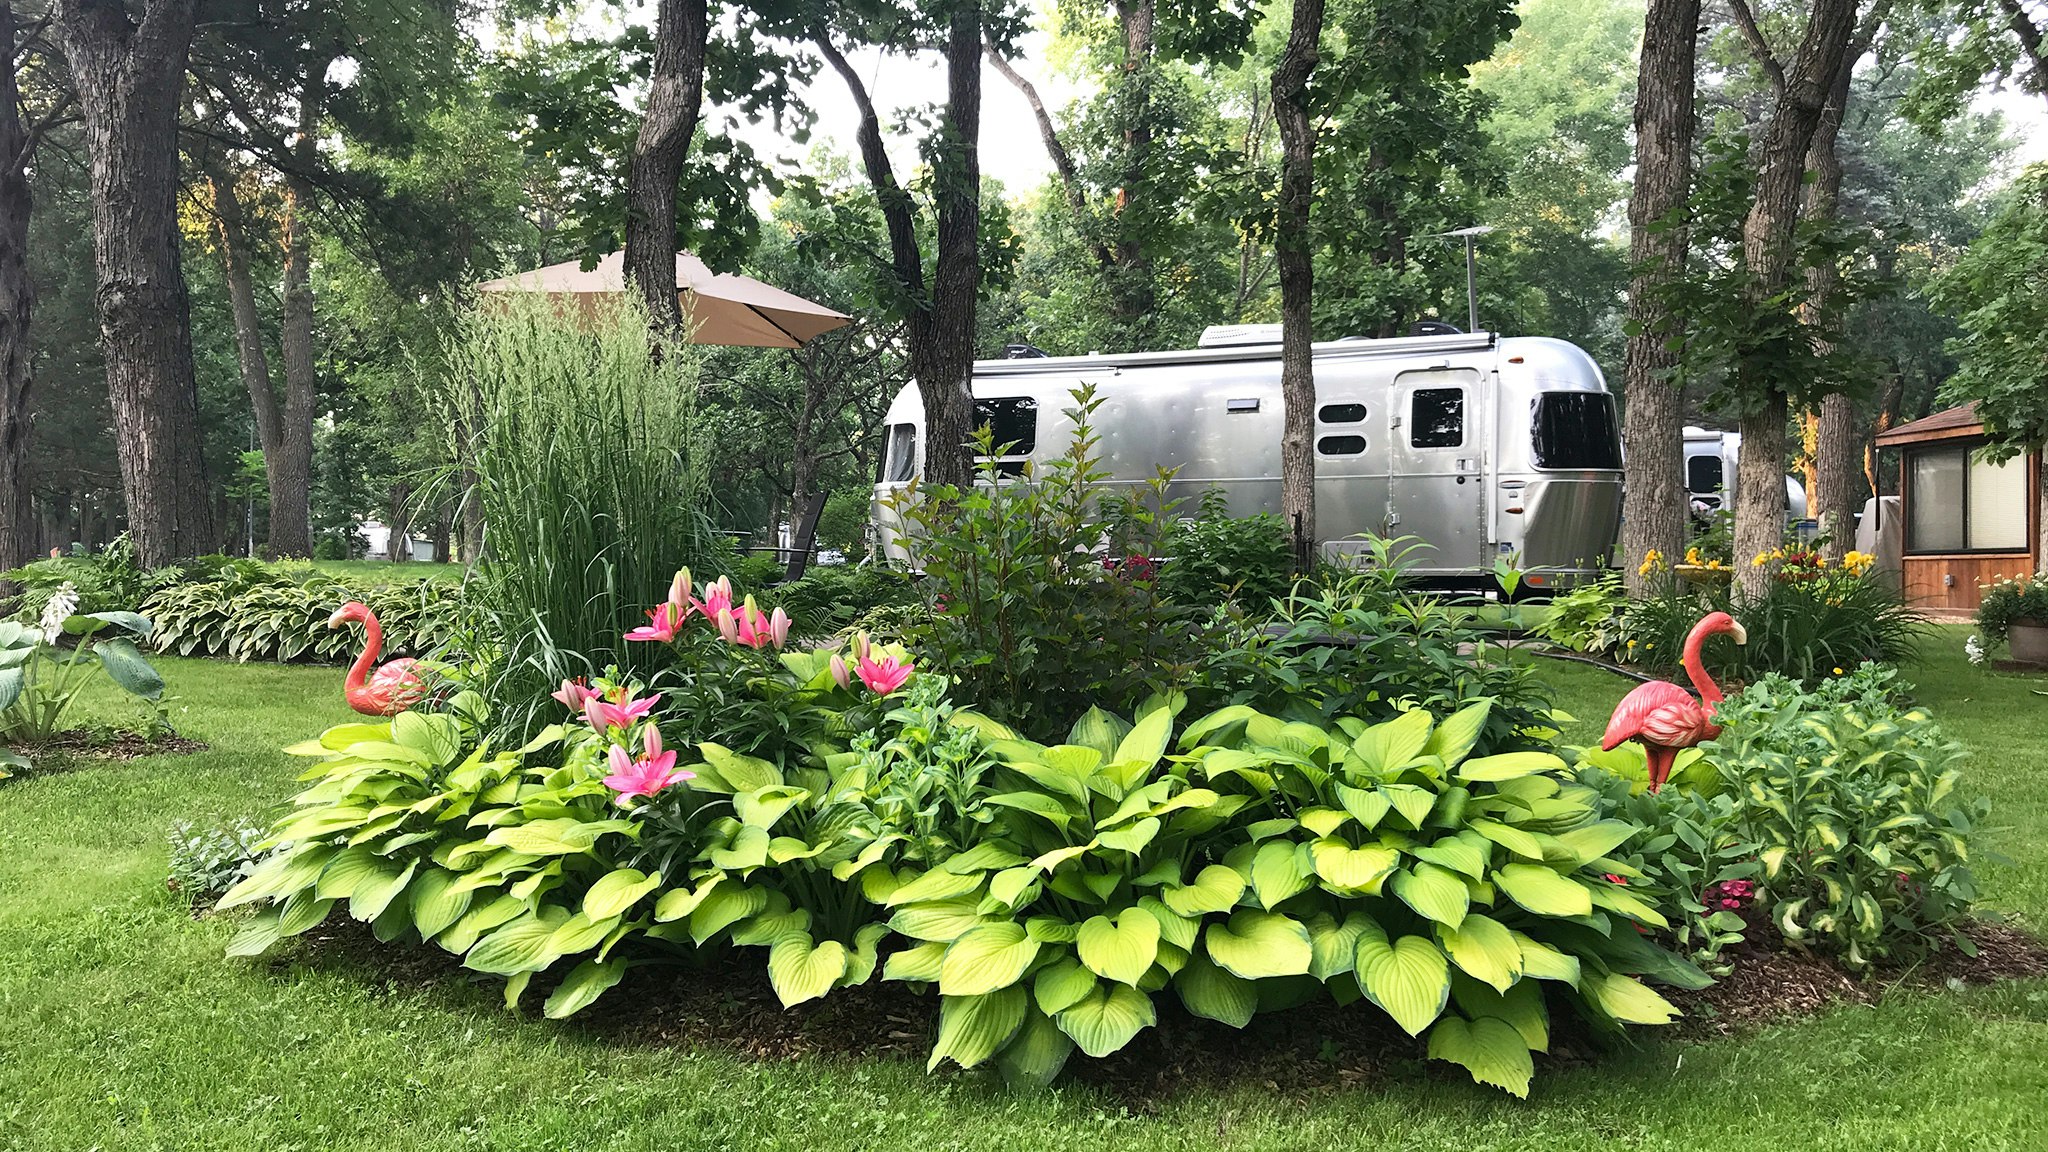 Airstream Travel Trailer in a garden with pink flamingo and trees